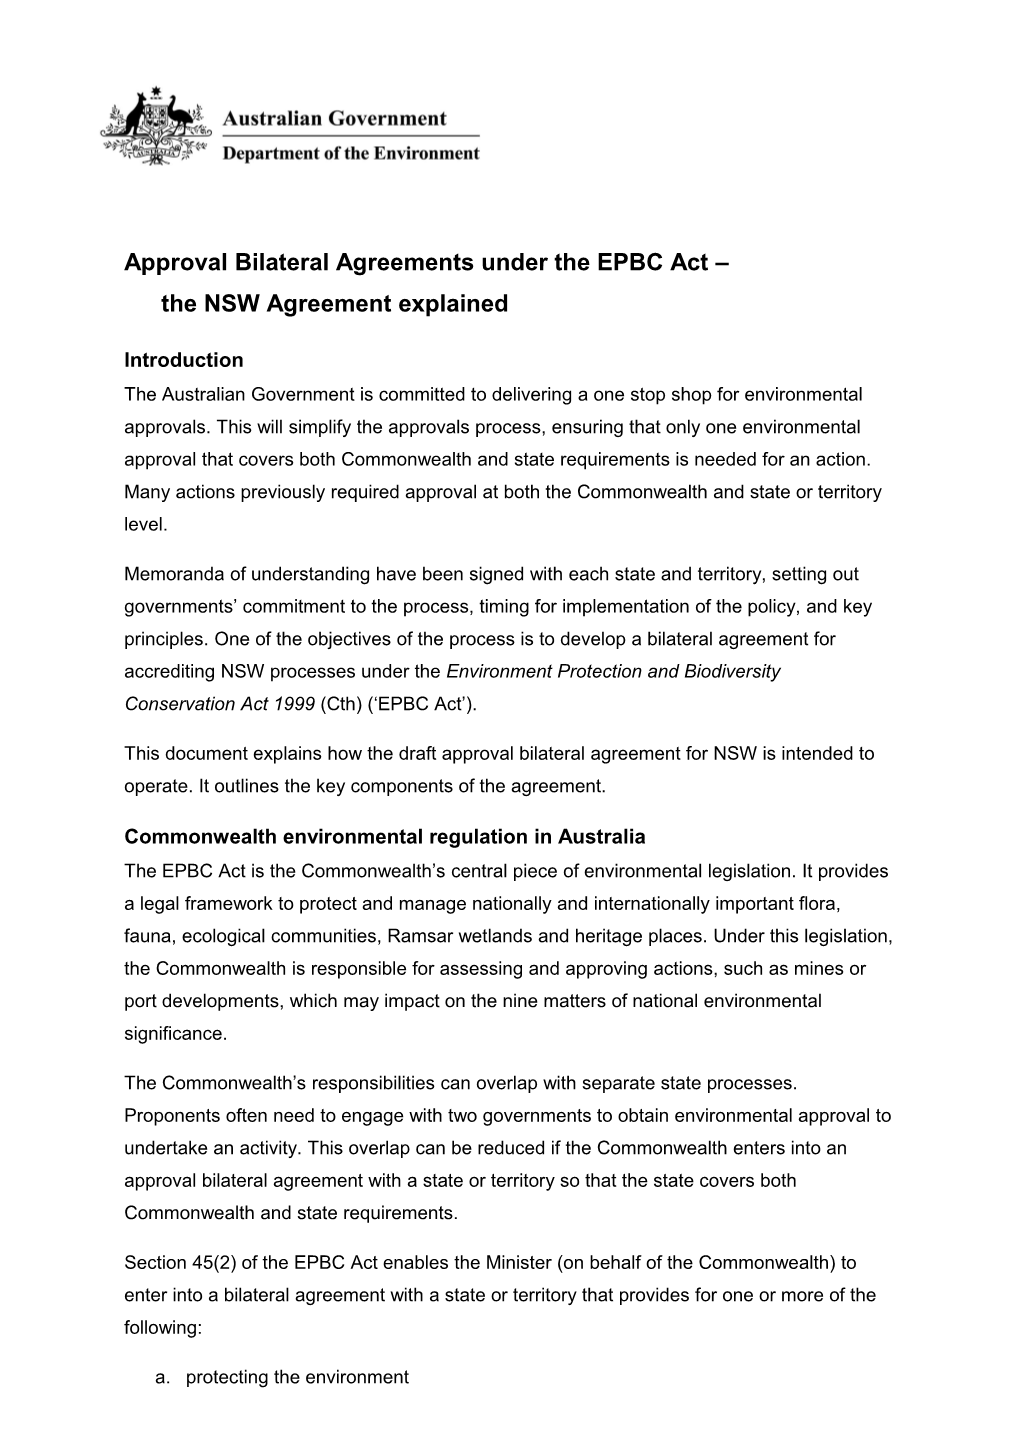 Approval Bilateral Agreements Under the EPBC Act the NSW Agreement Explained